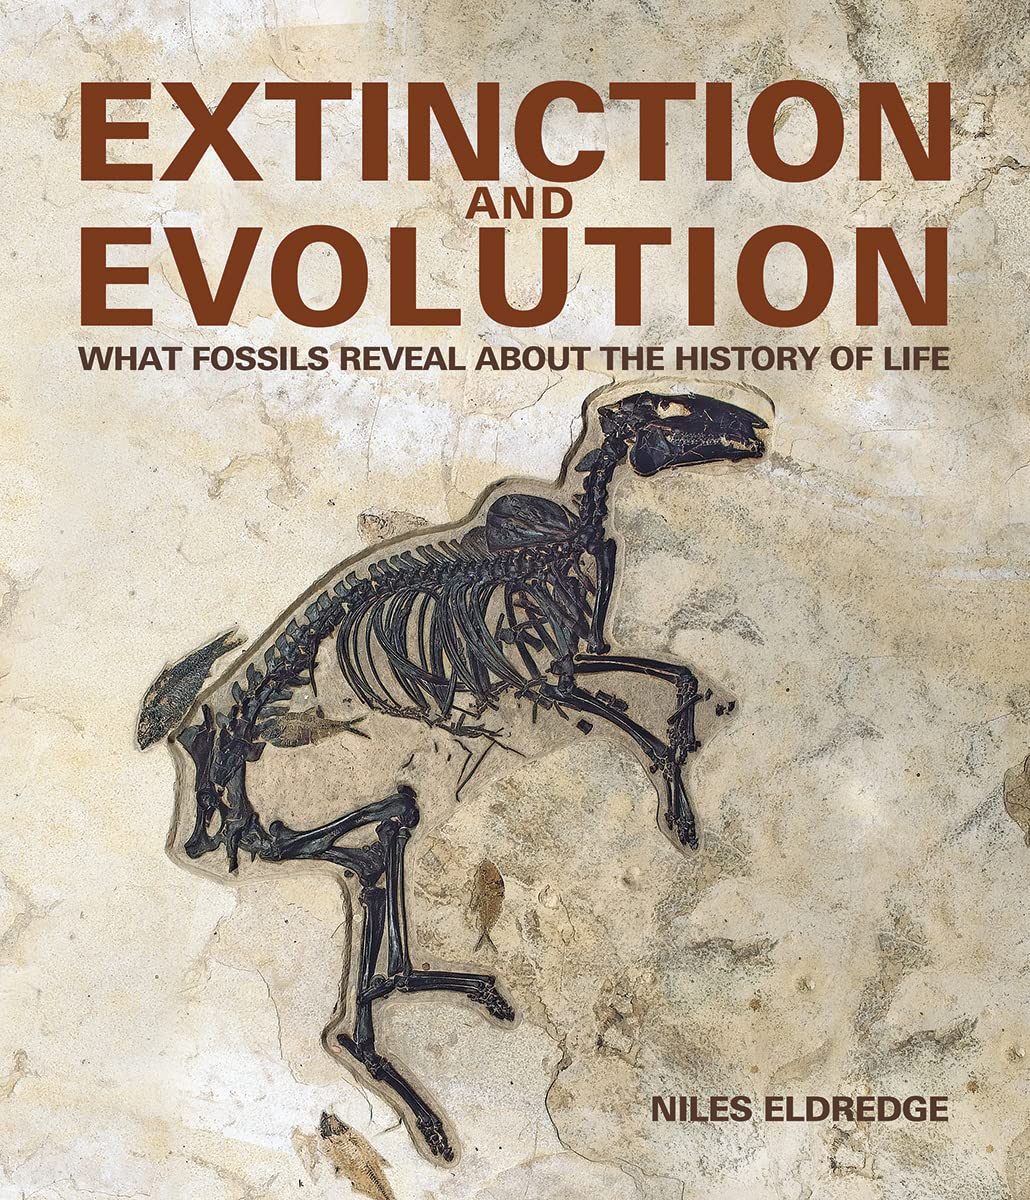 Image Extinction and evolution : what fossils reveal about the history of life